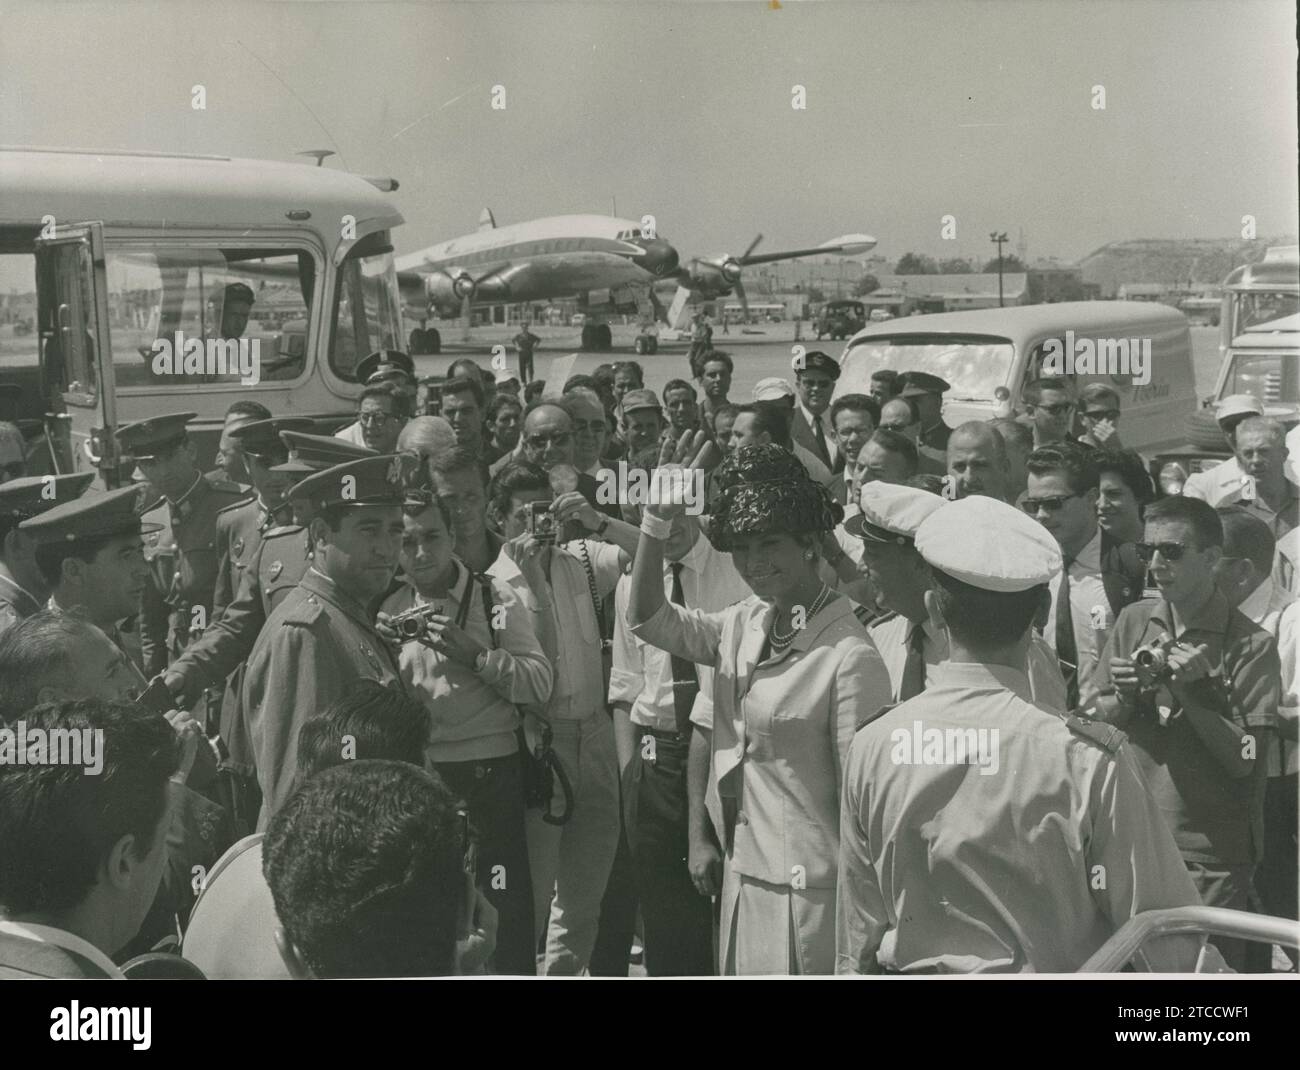 Madrid, Barajas Airport, 1961. Sofía Loren greets upon arriving in Madrid, surrounded by journalists and police officers. Credit: Album / Archivo ABC / Teodoro Naranjo Domínguez Stock Photo